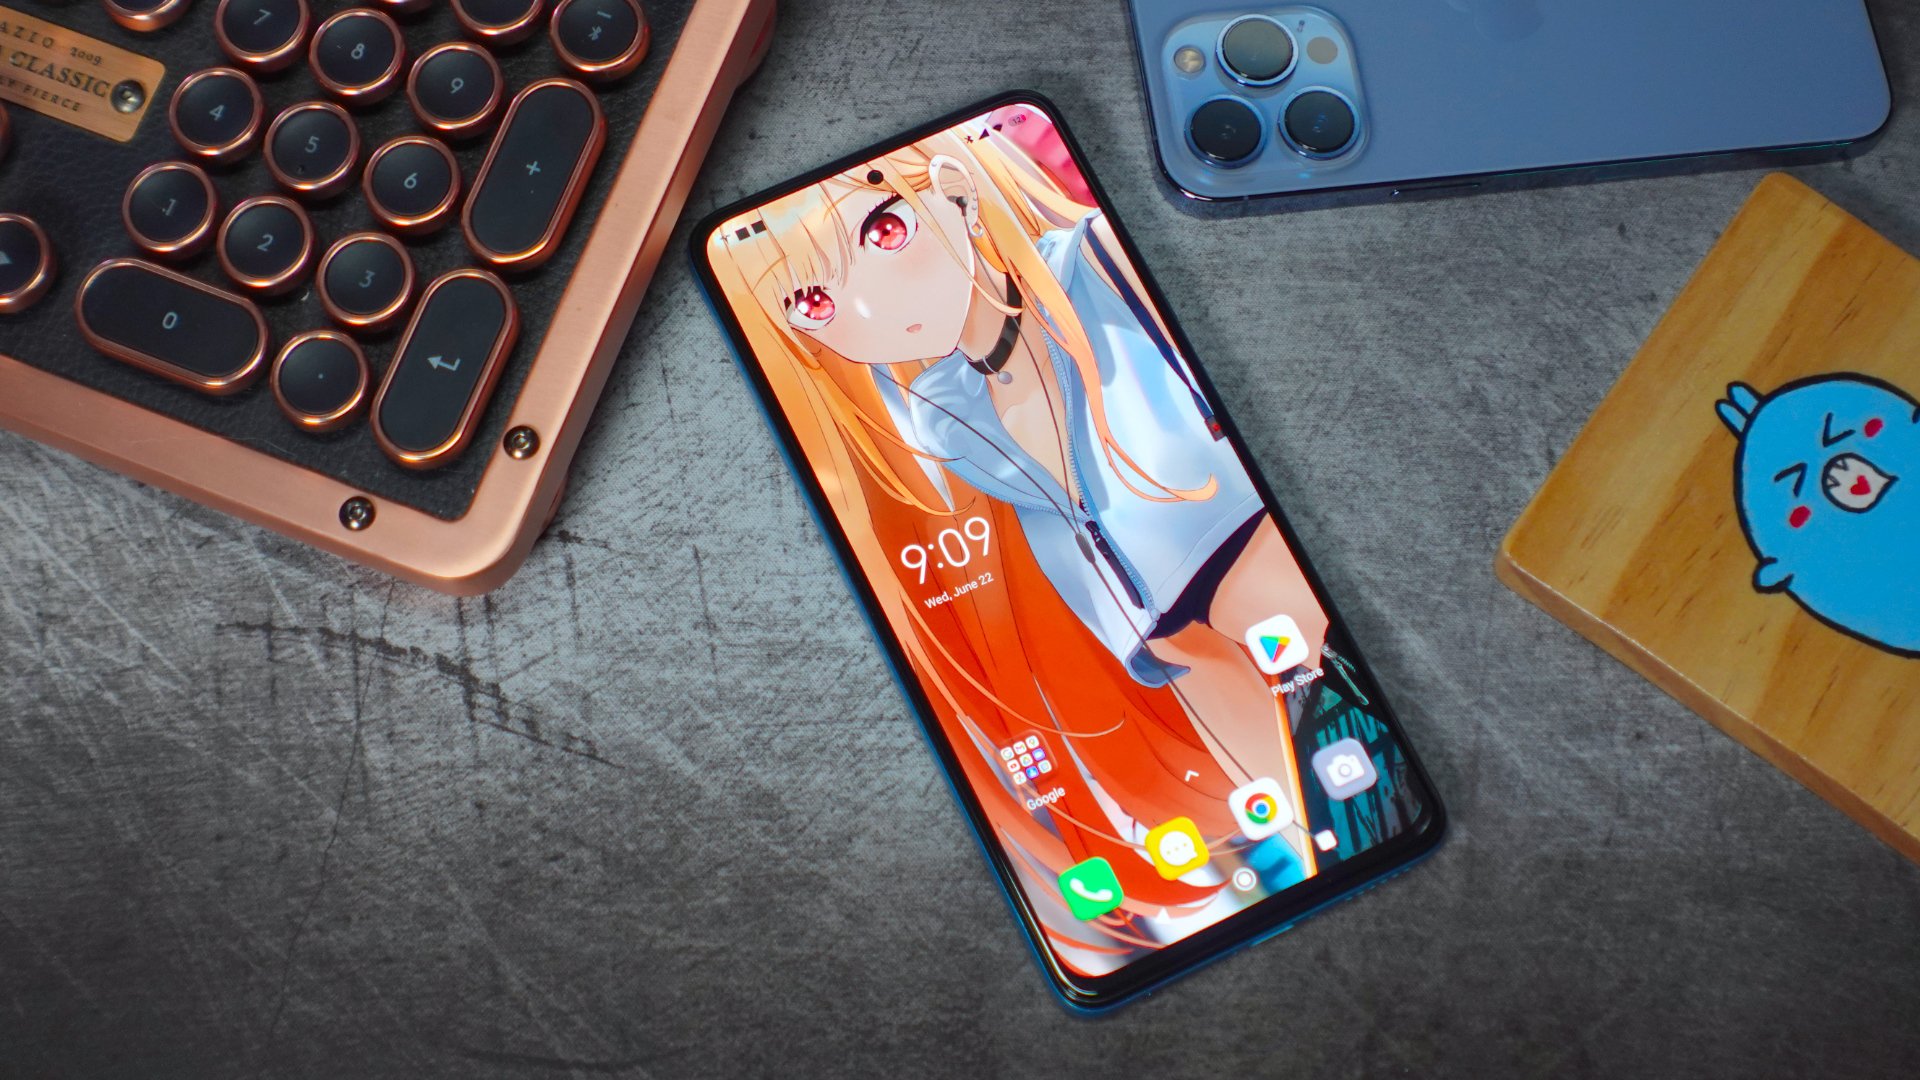 Wallpaper Engine Is on Android! — Sypnotix